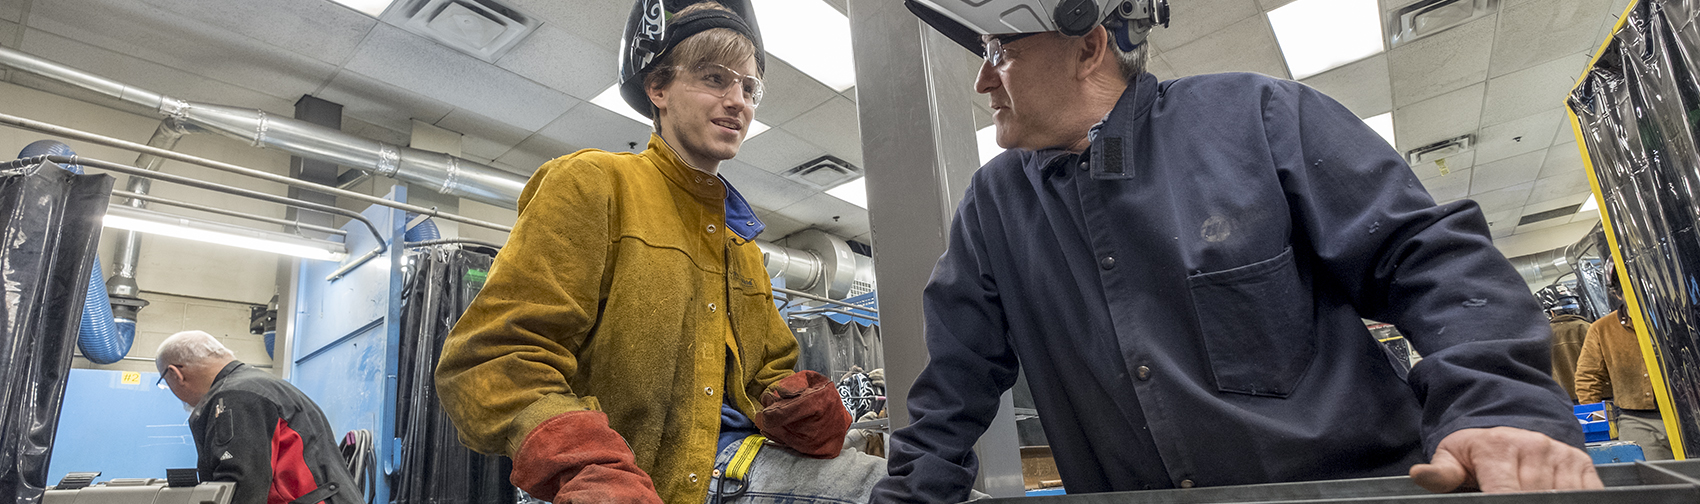 Welding instructor works with a student on a project in the shop space